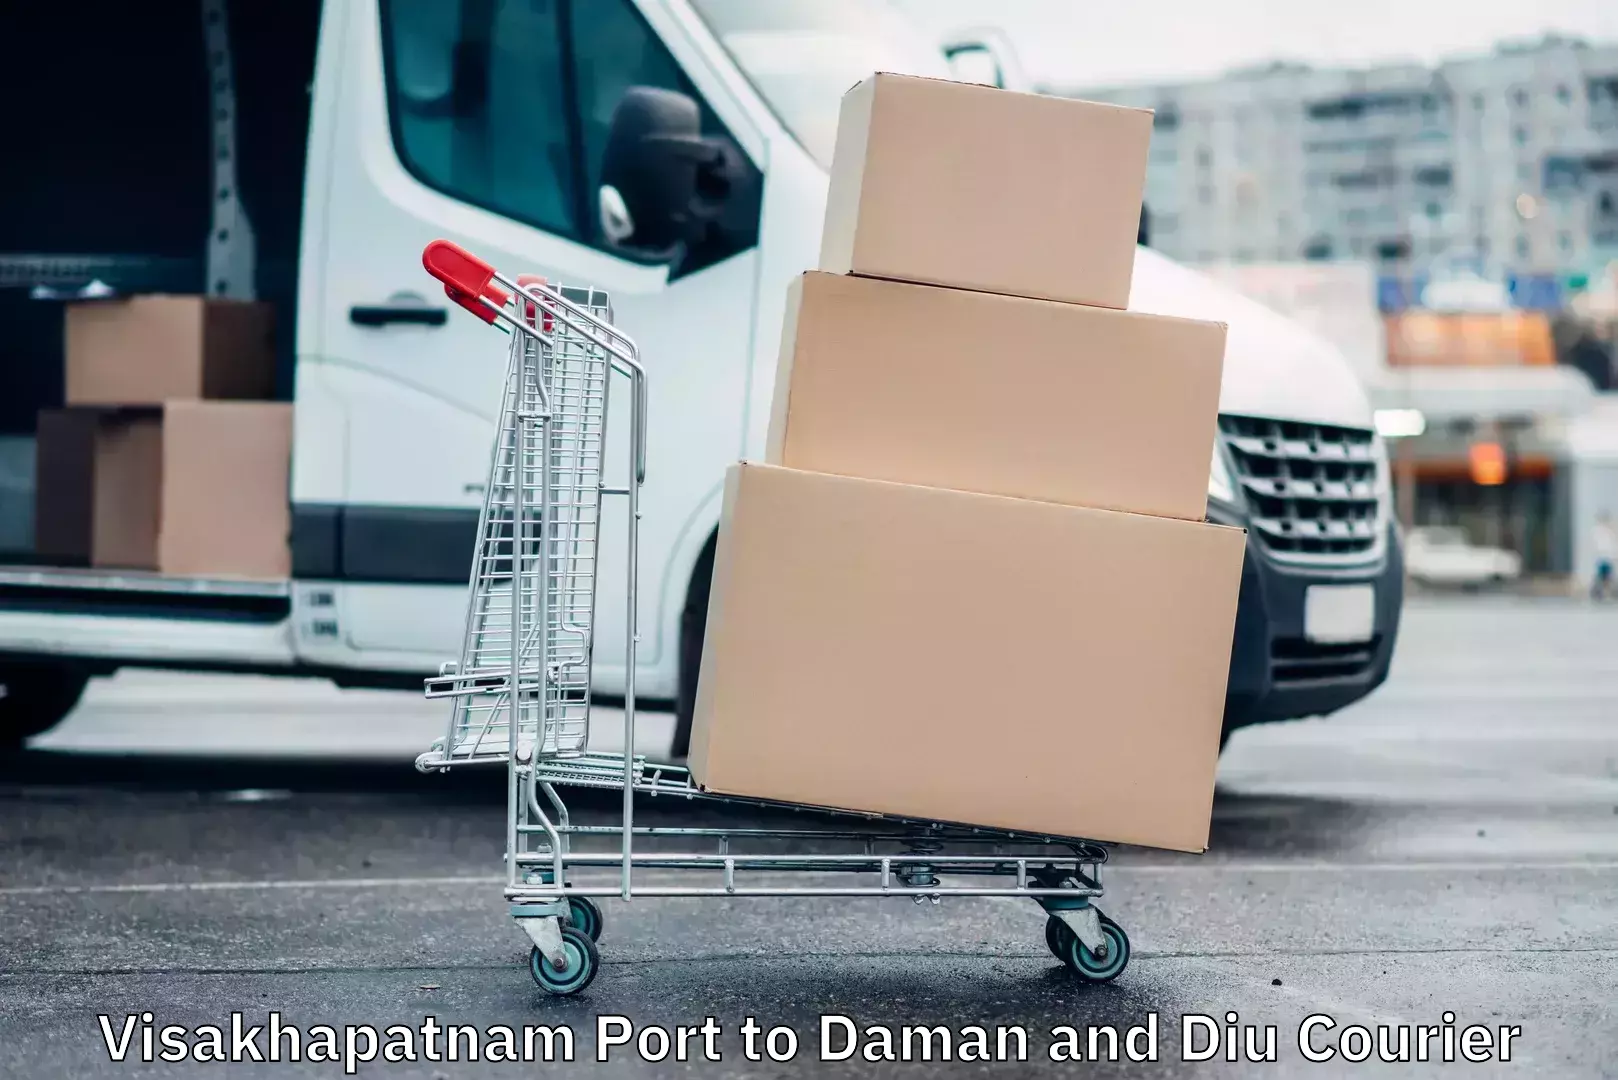 E-commerce logistics support in Visakhapatnam Port to Daman and Diu